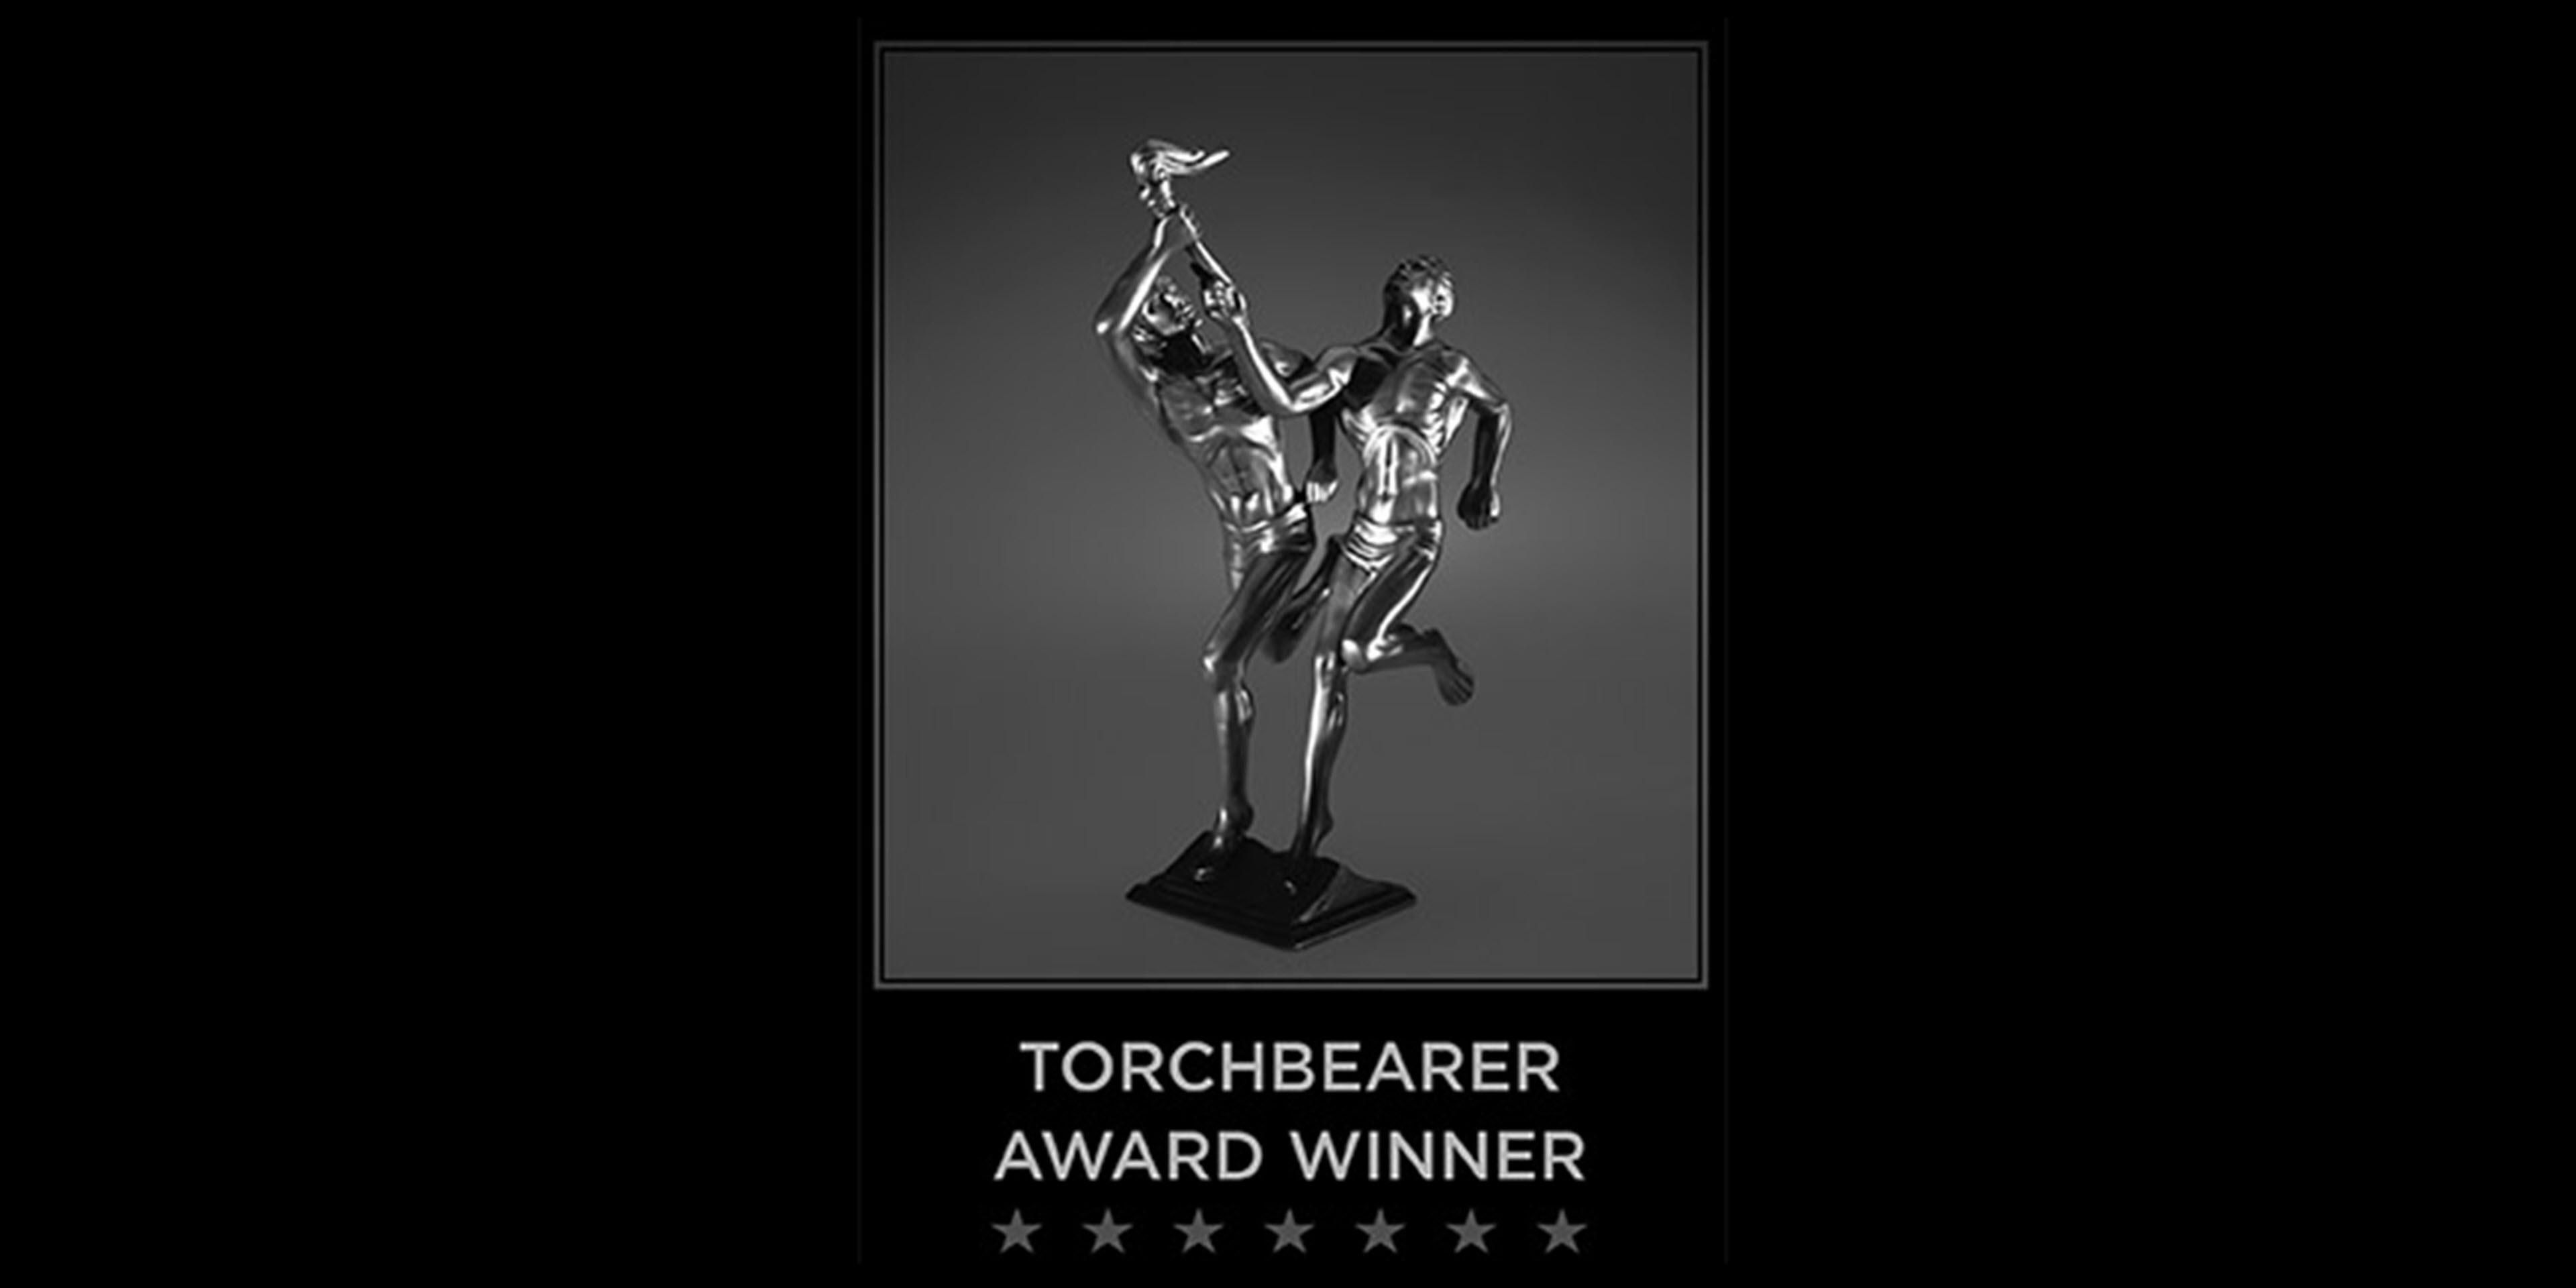 Our hotel is a proud recipient of the Torchbearer Award for Outstanding Guest Satisfaction, Cleanliness, and Overall Satisfaction.